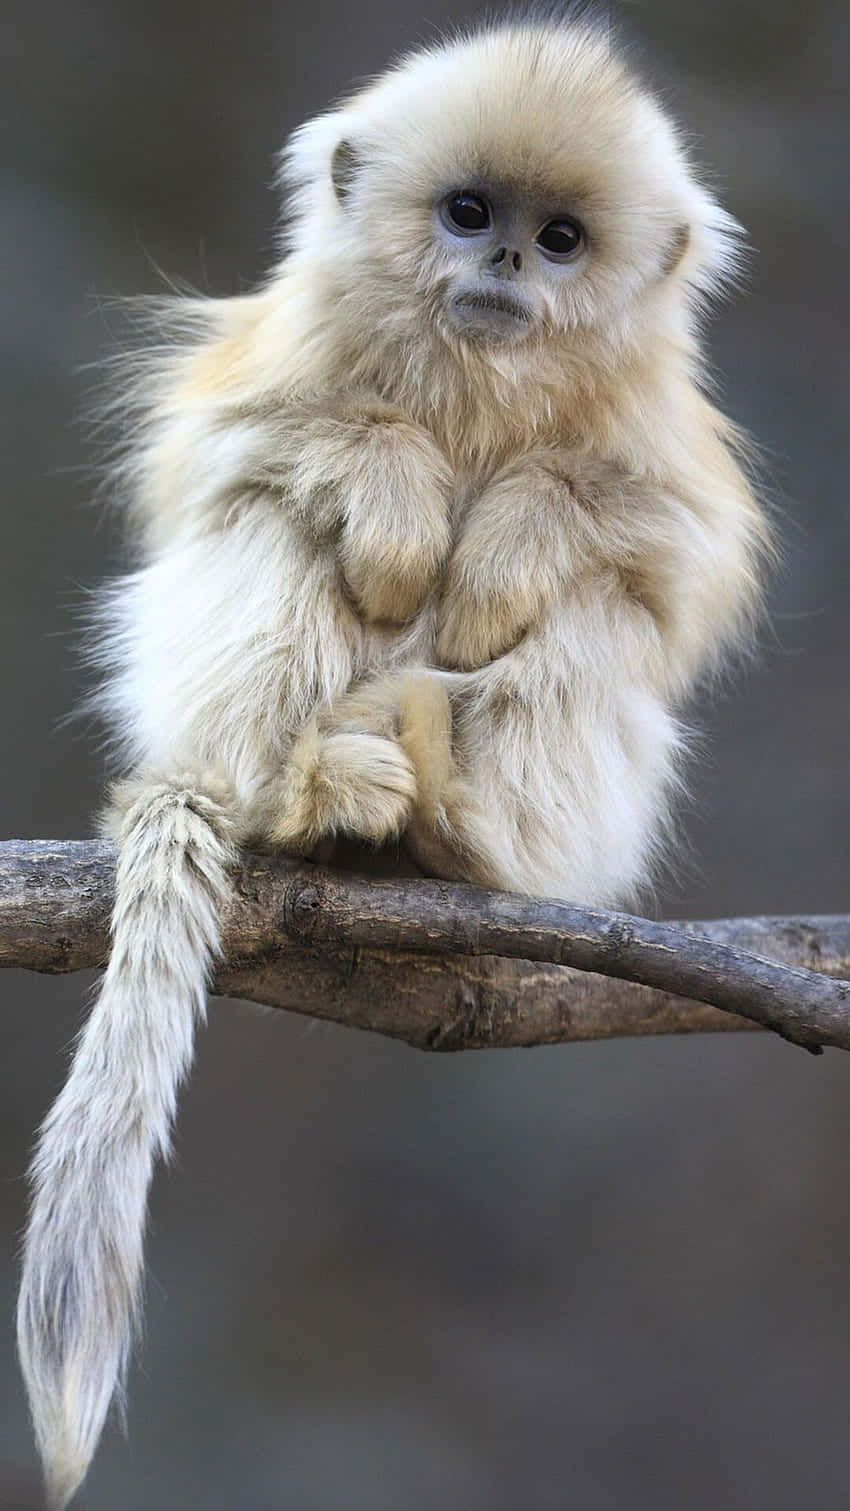 A monkey with a new iPhone Wallpaper